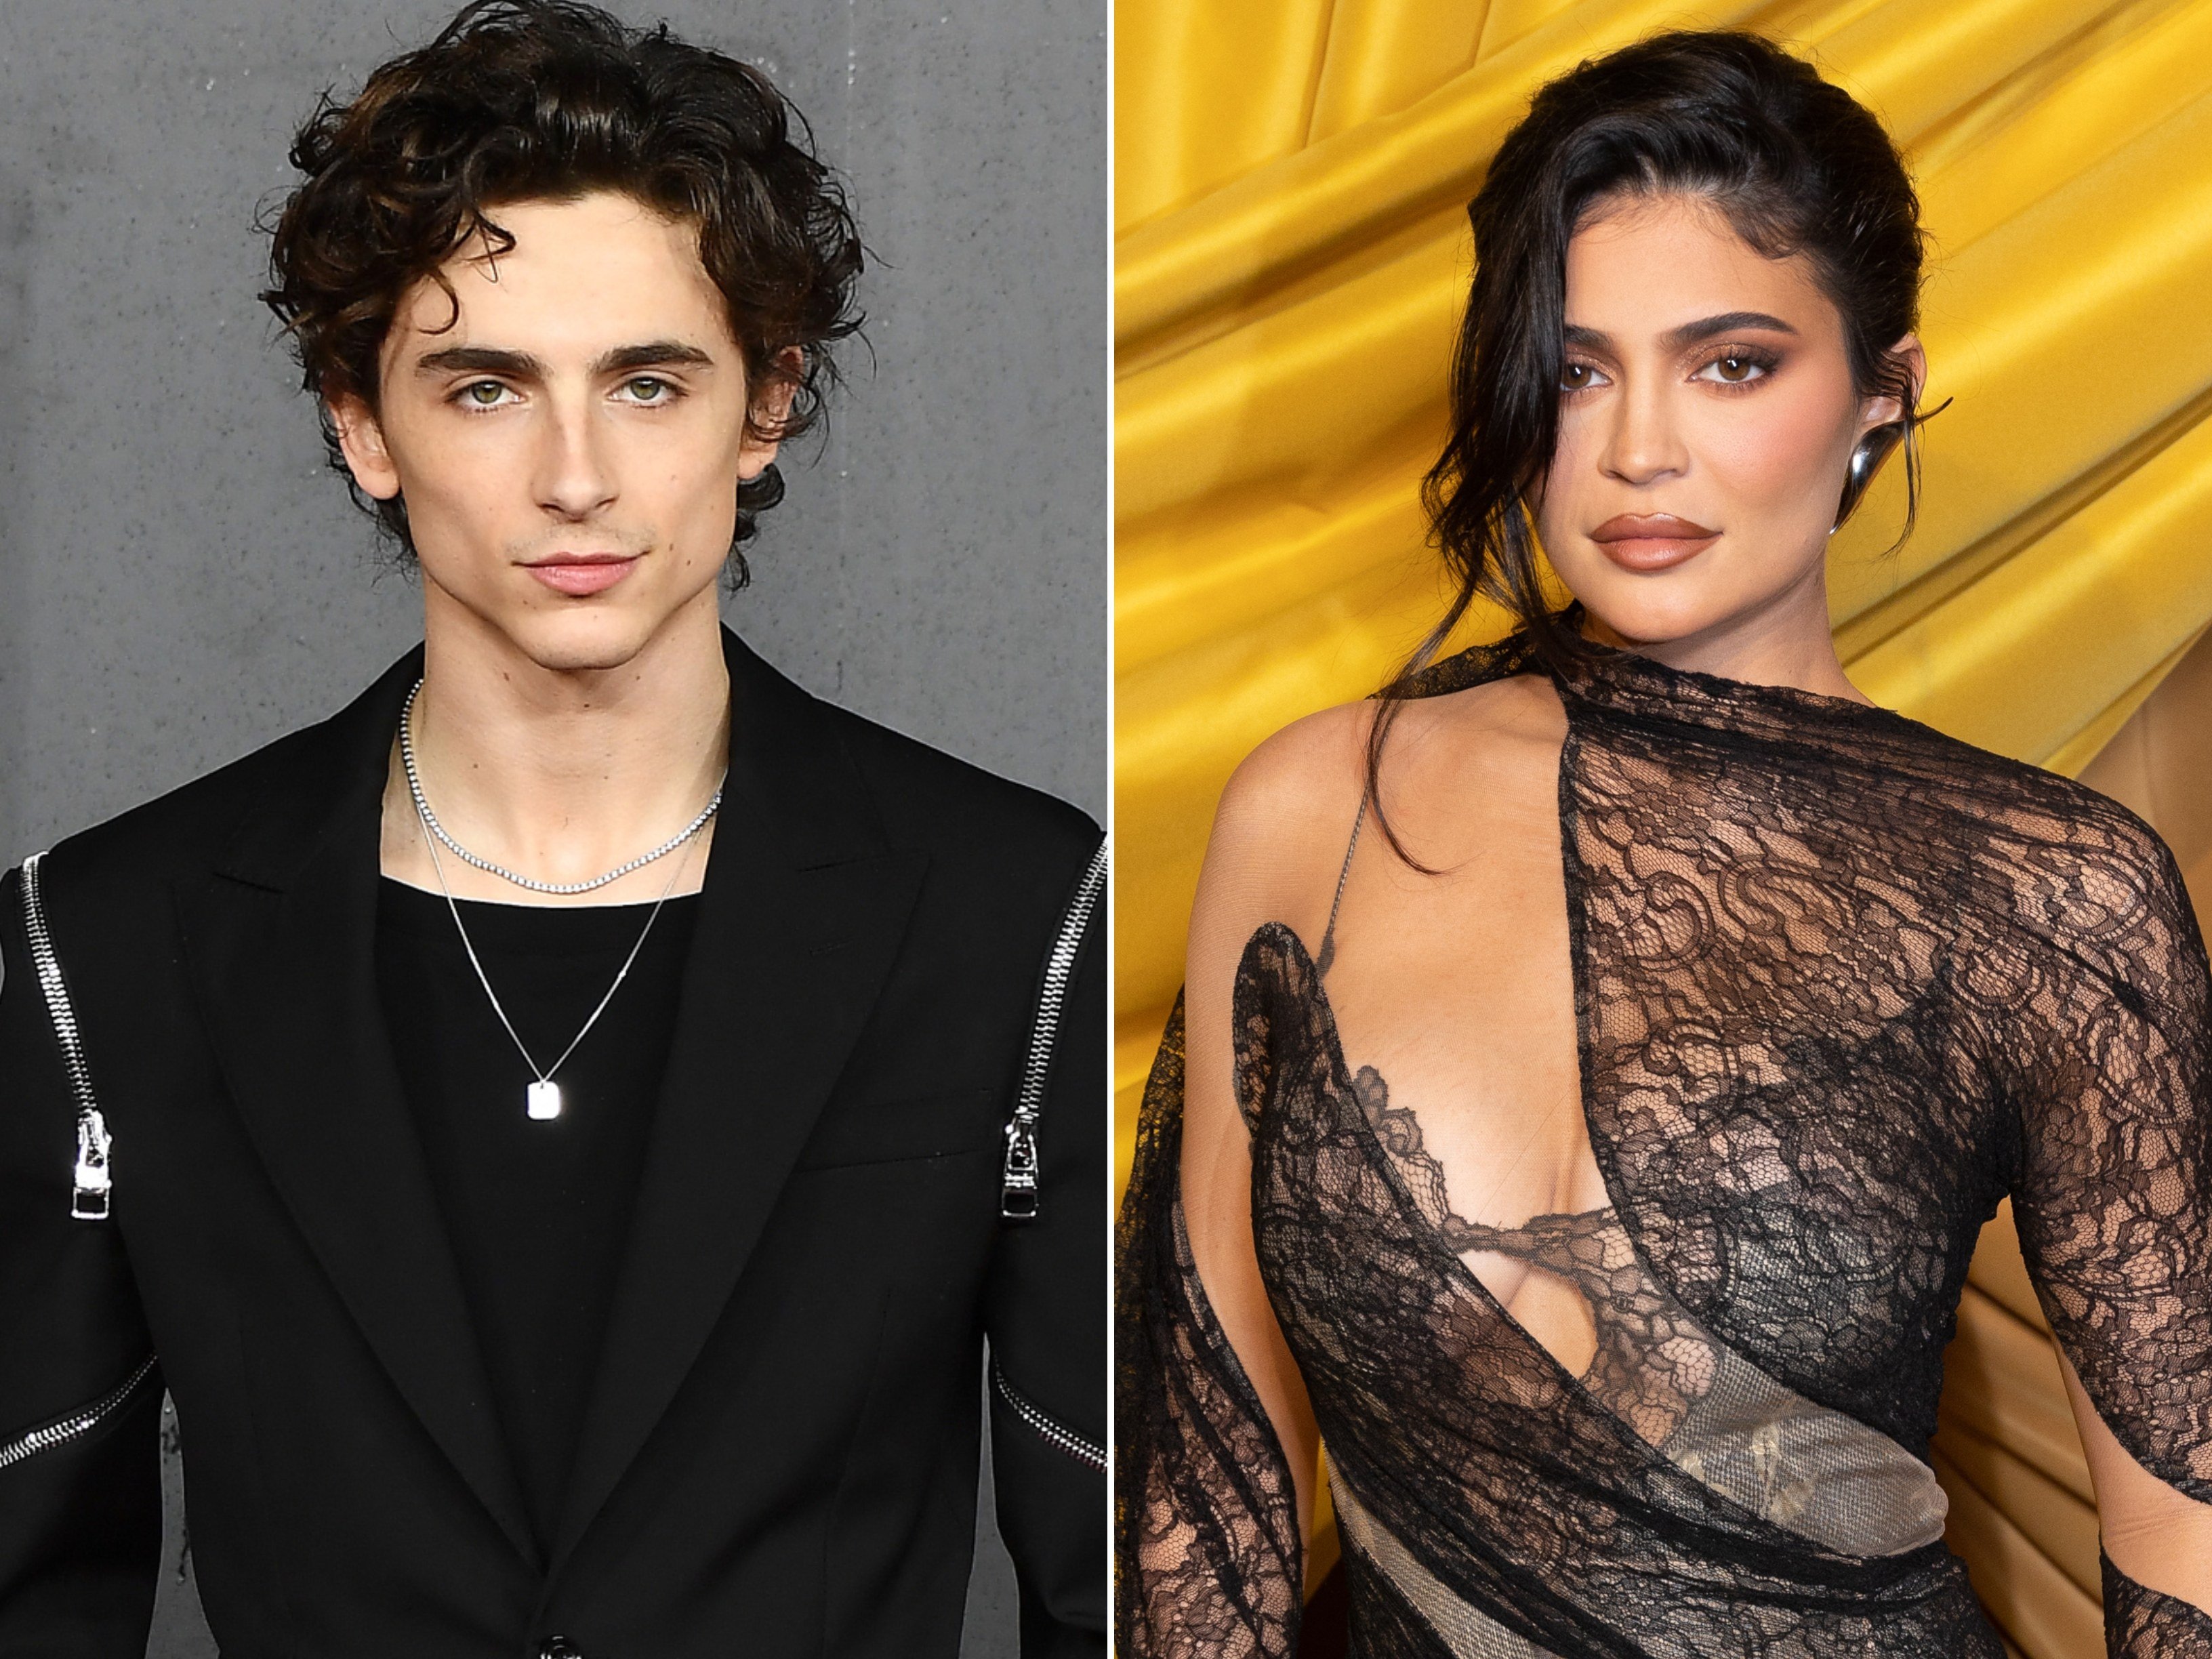 Kylie Jenner and Timothée Chalamet are rumoured to be dating. Photos: Warner Bros, WireImage